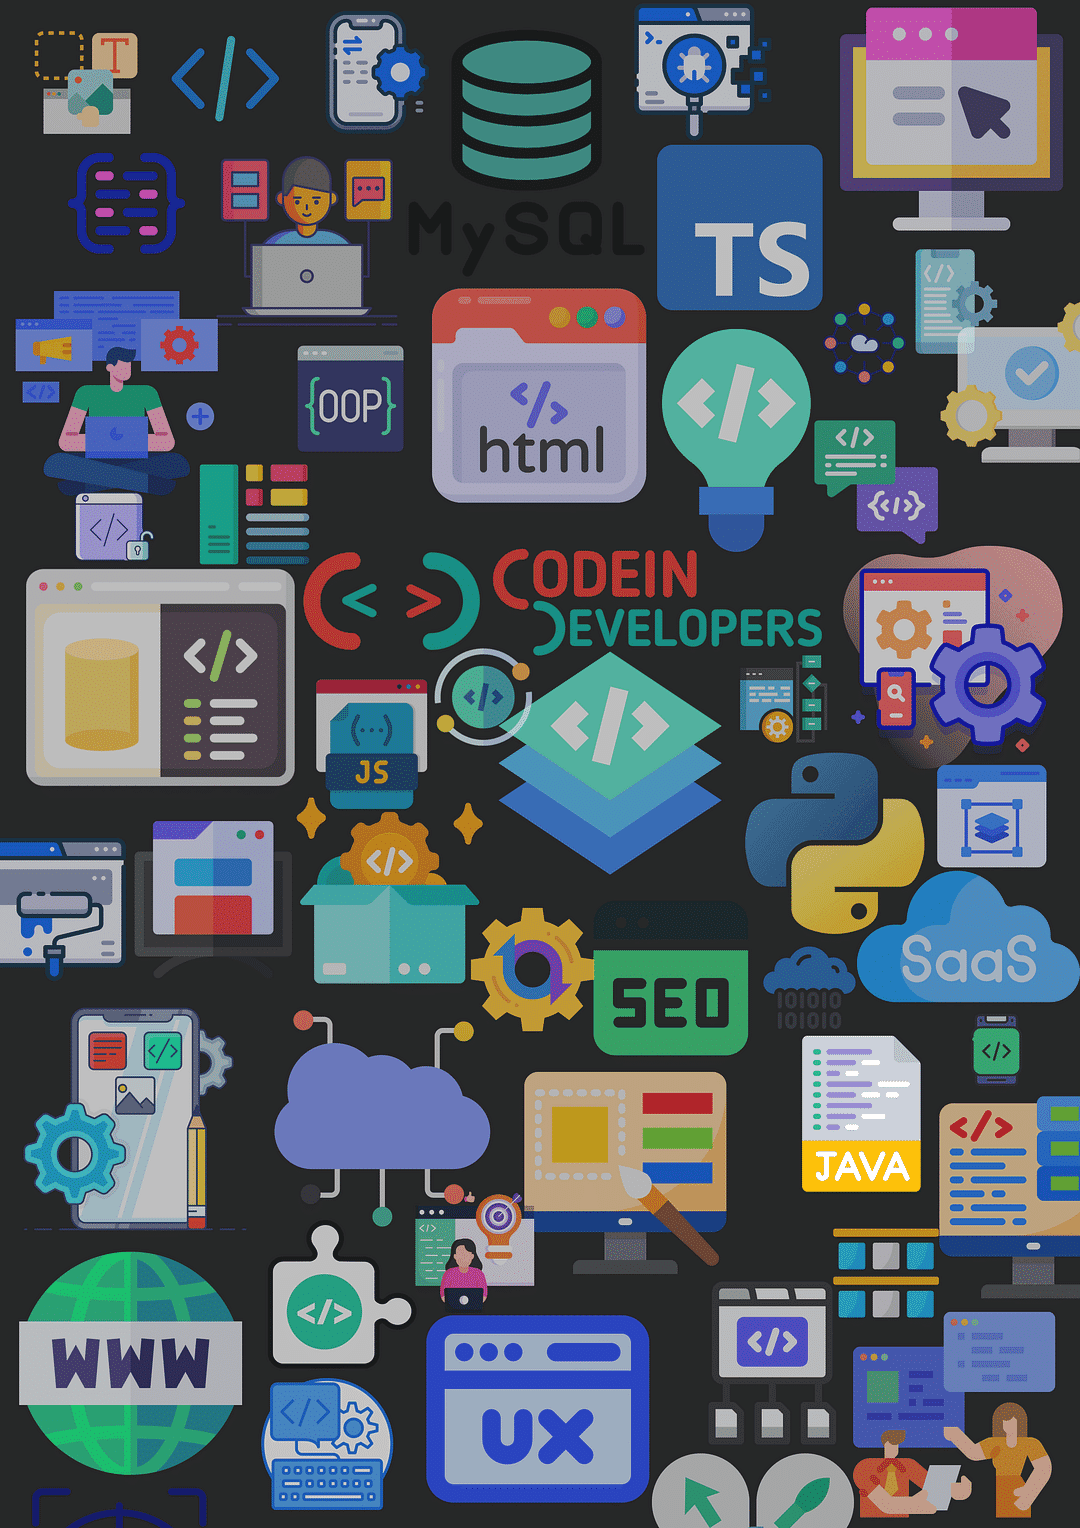 Codein Developers cover